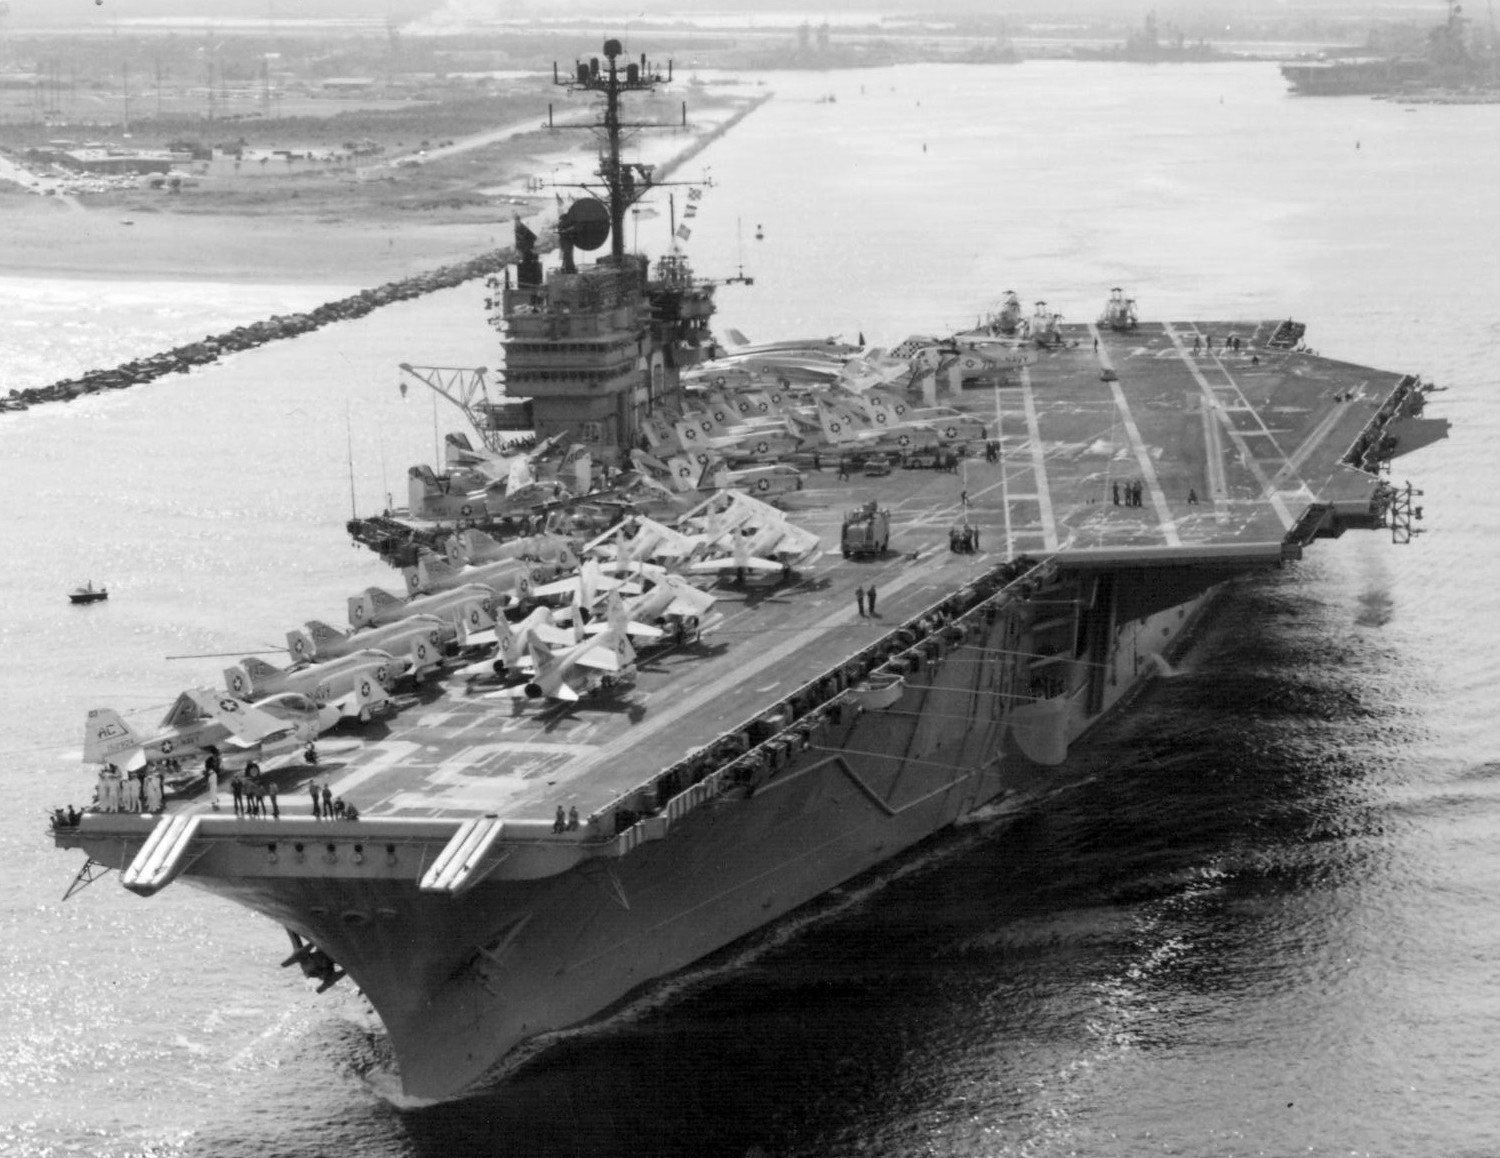 cvw-3 carrier air wing us navy uss saratoga cva-60 embarked squadrons 35